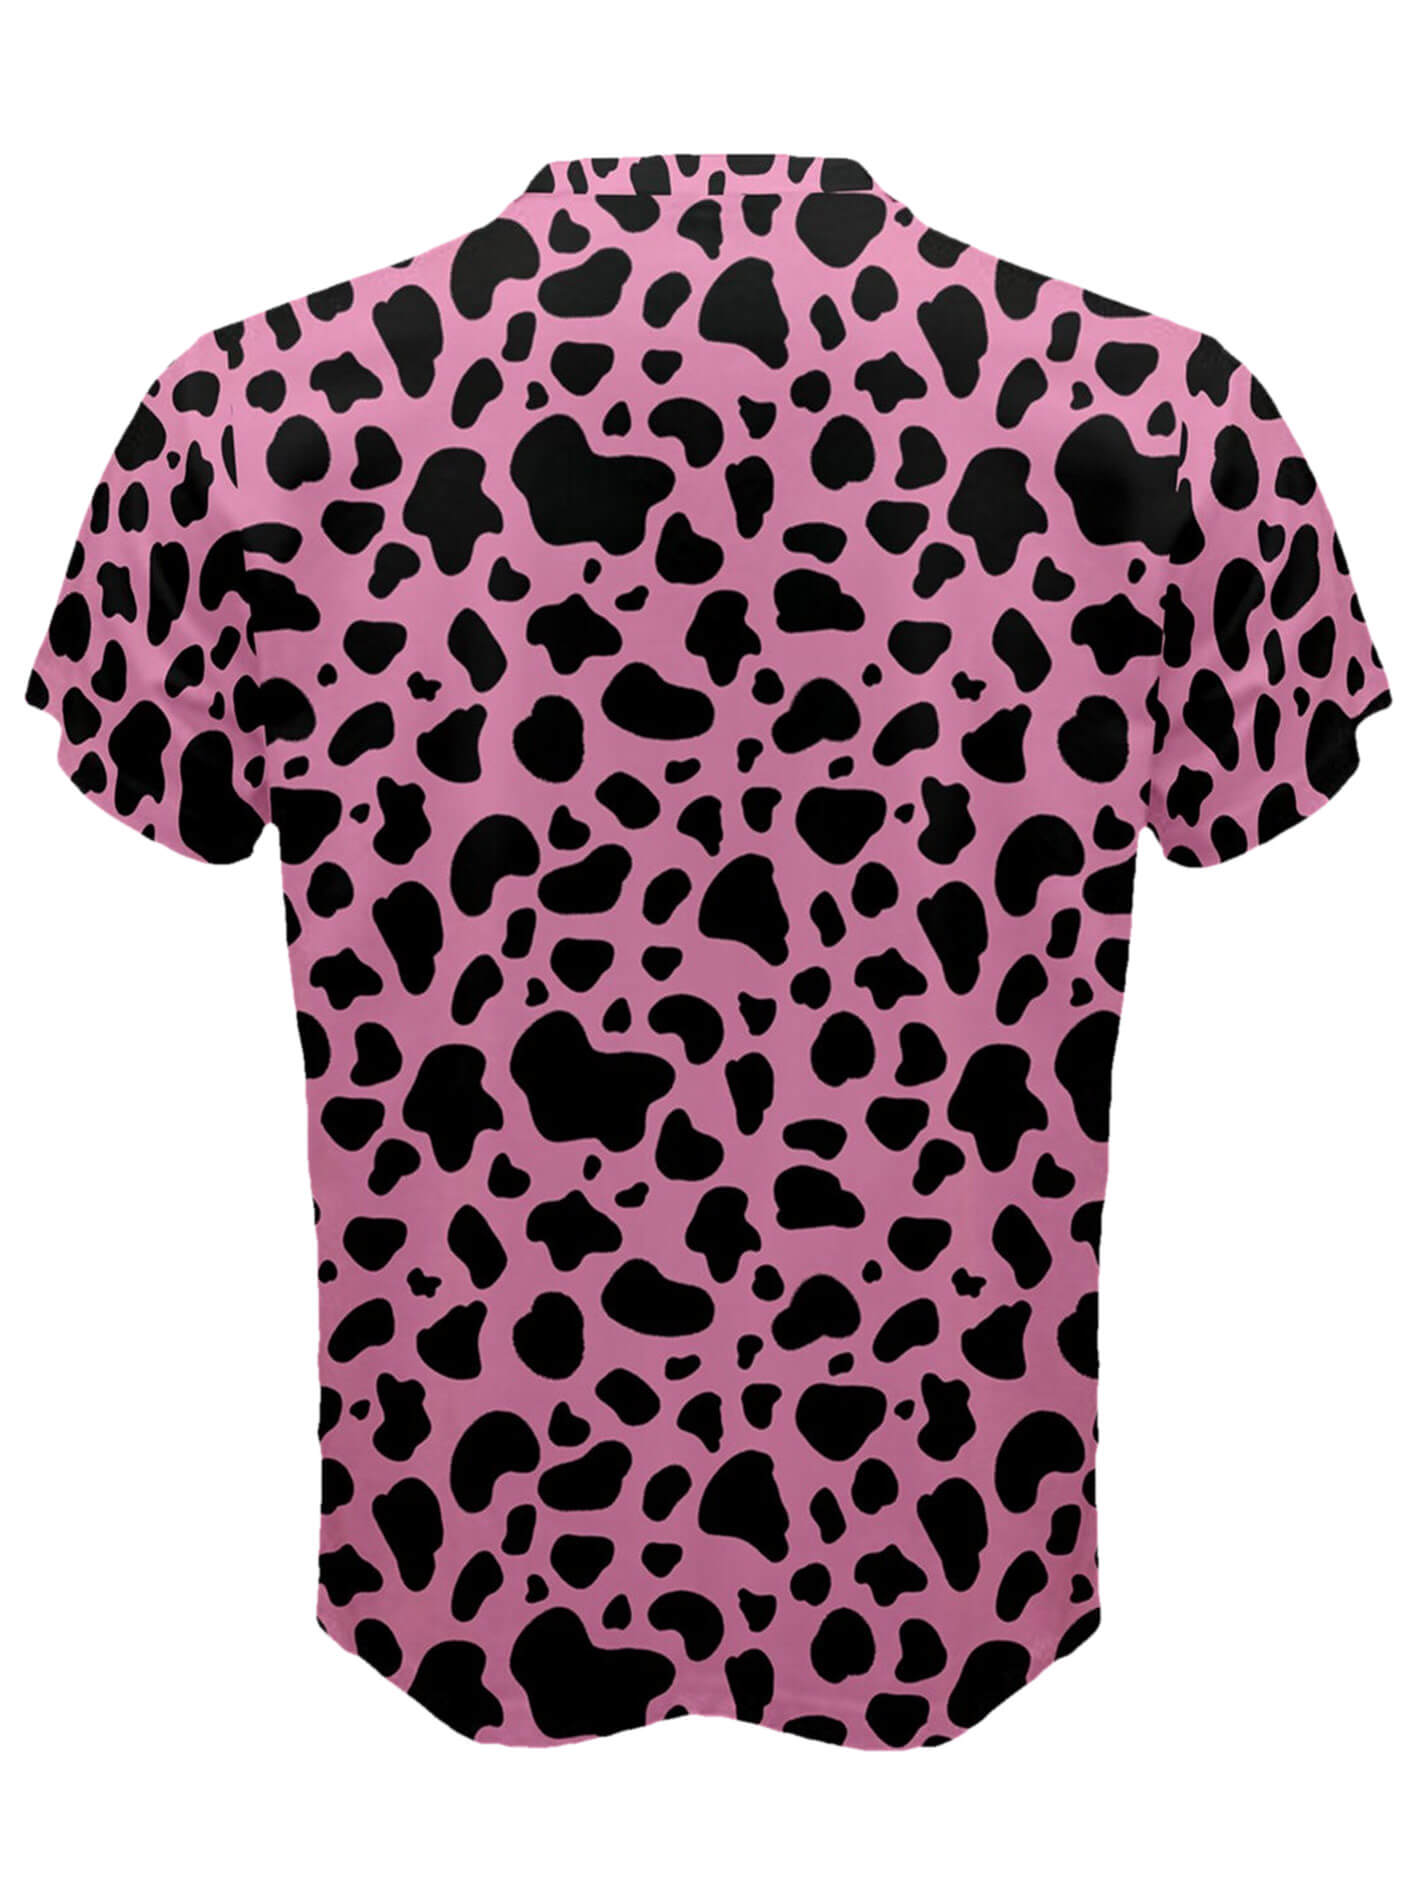 Pink cow print plus size tee.